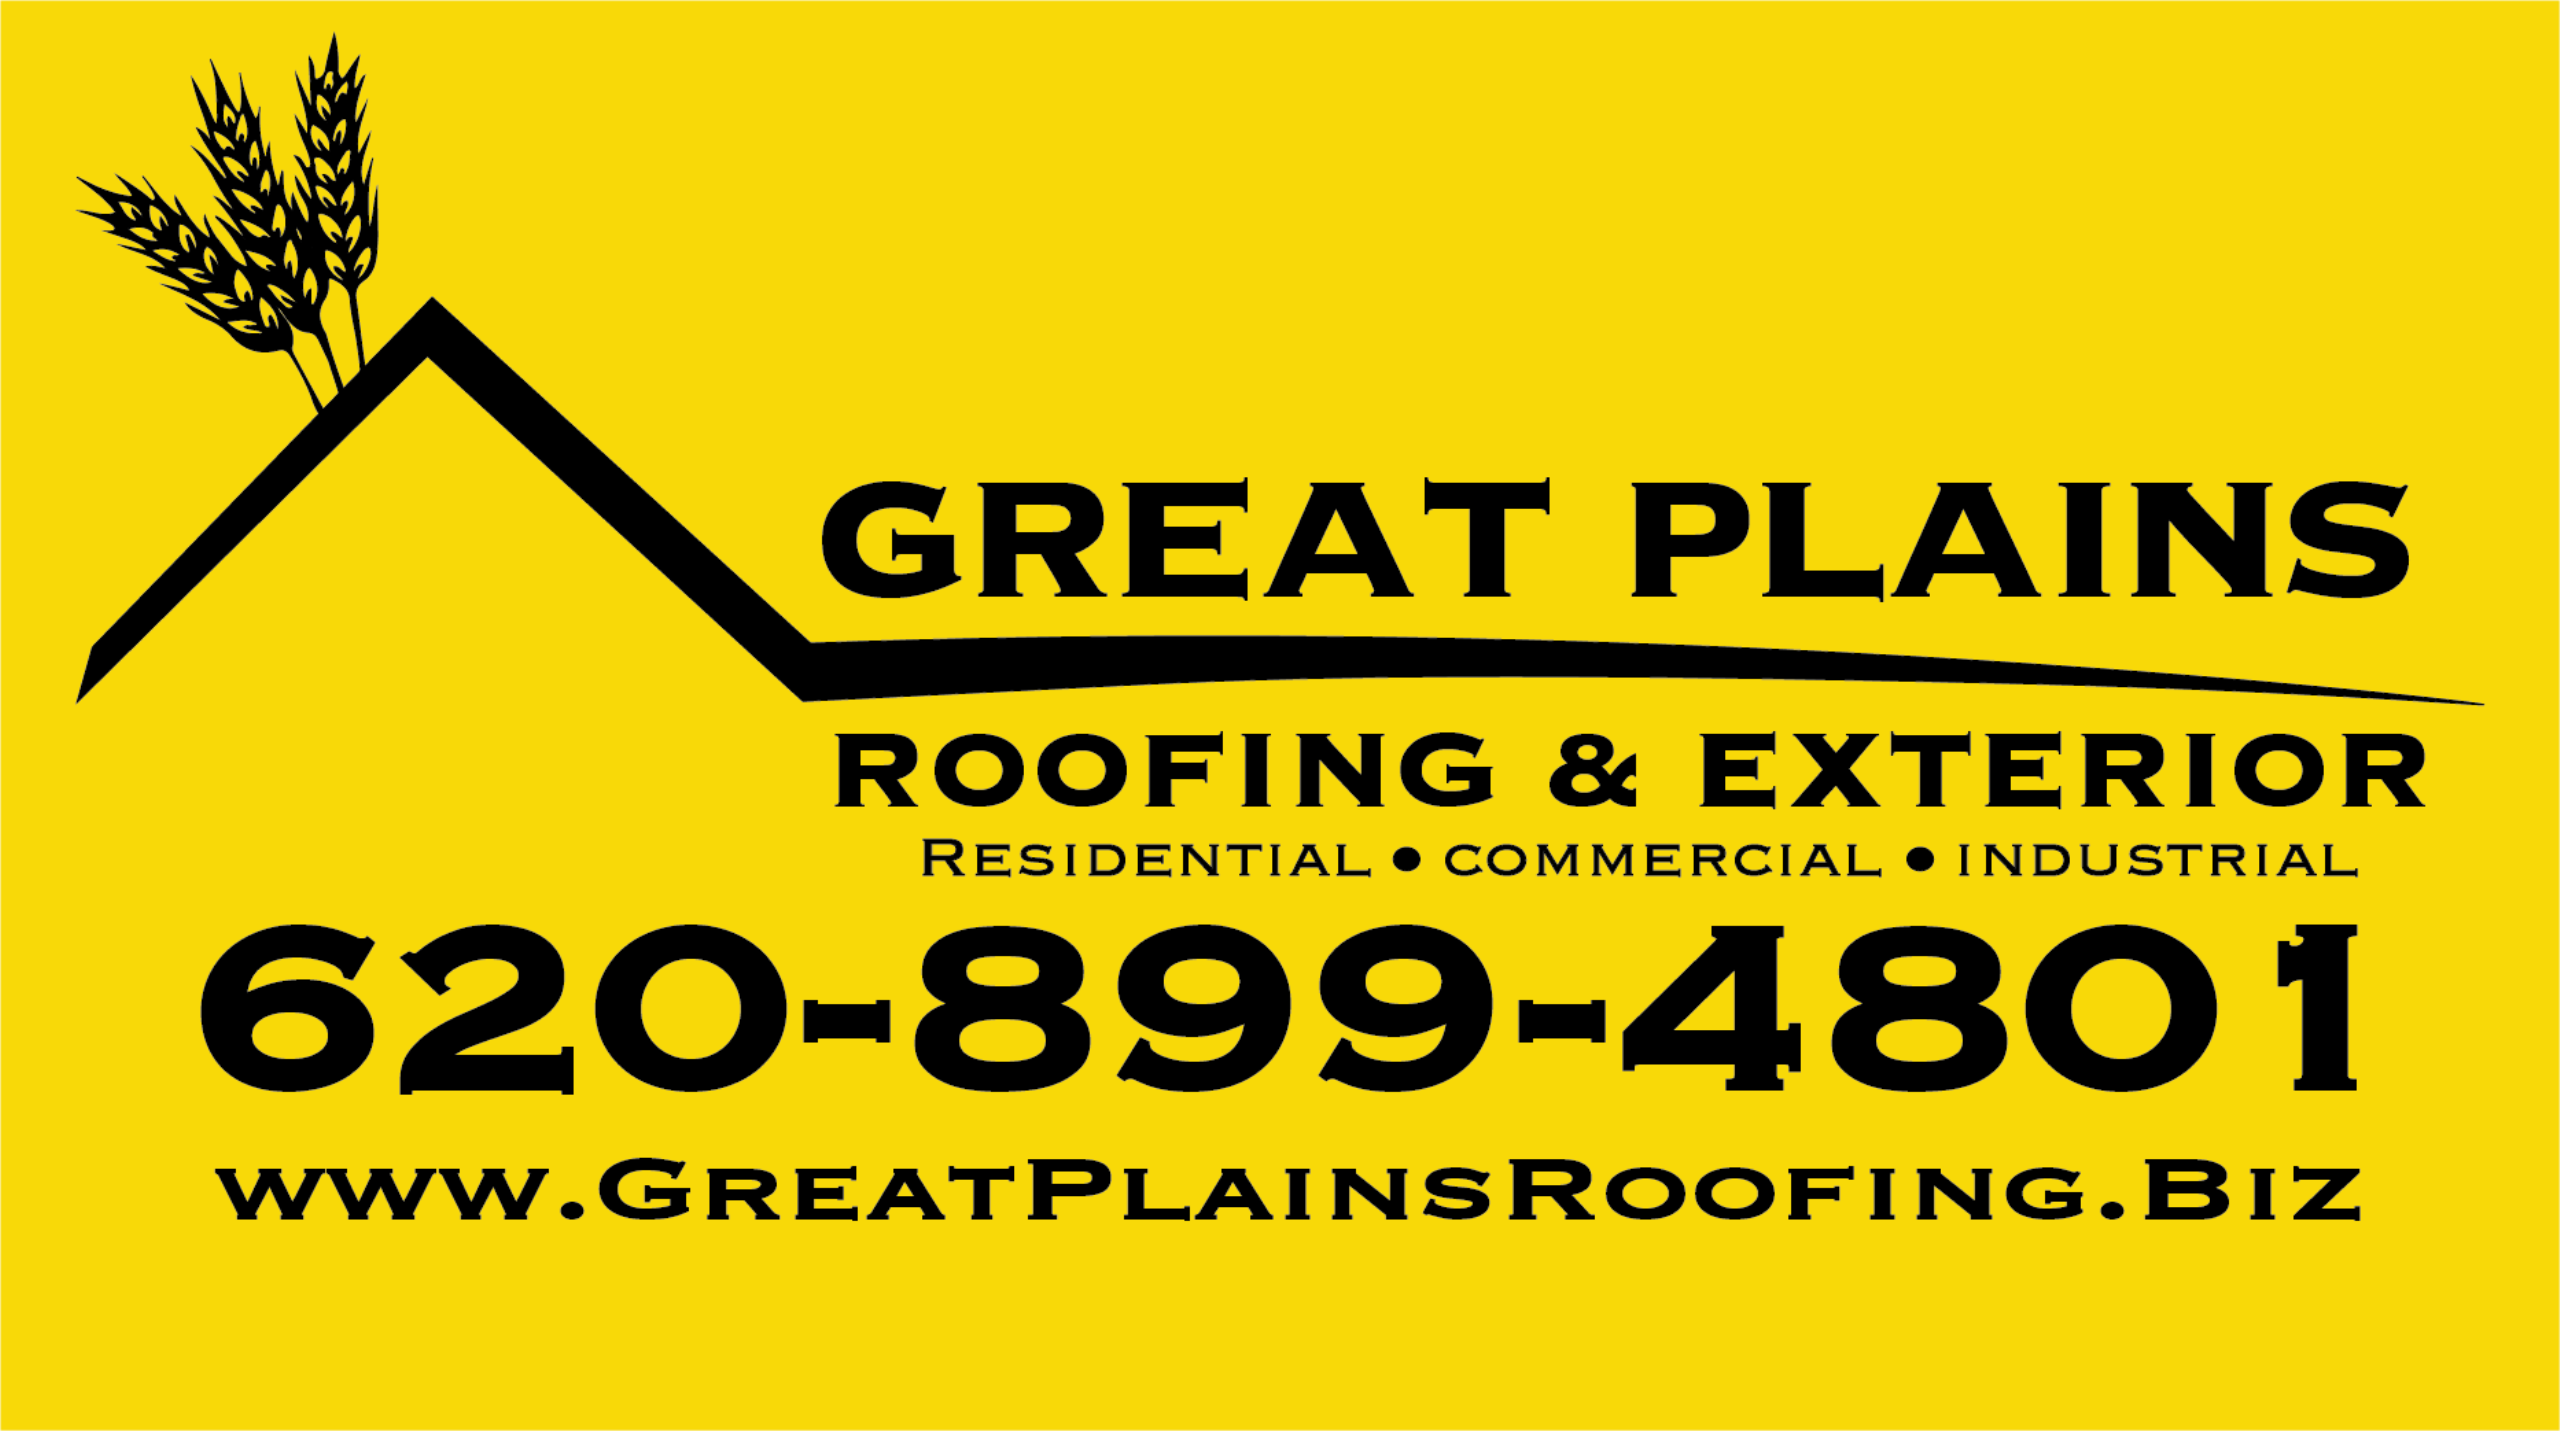 Great Plains Roofing & Exterior Logo